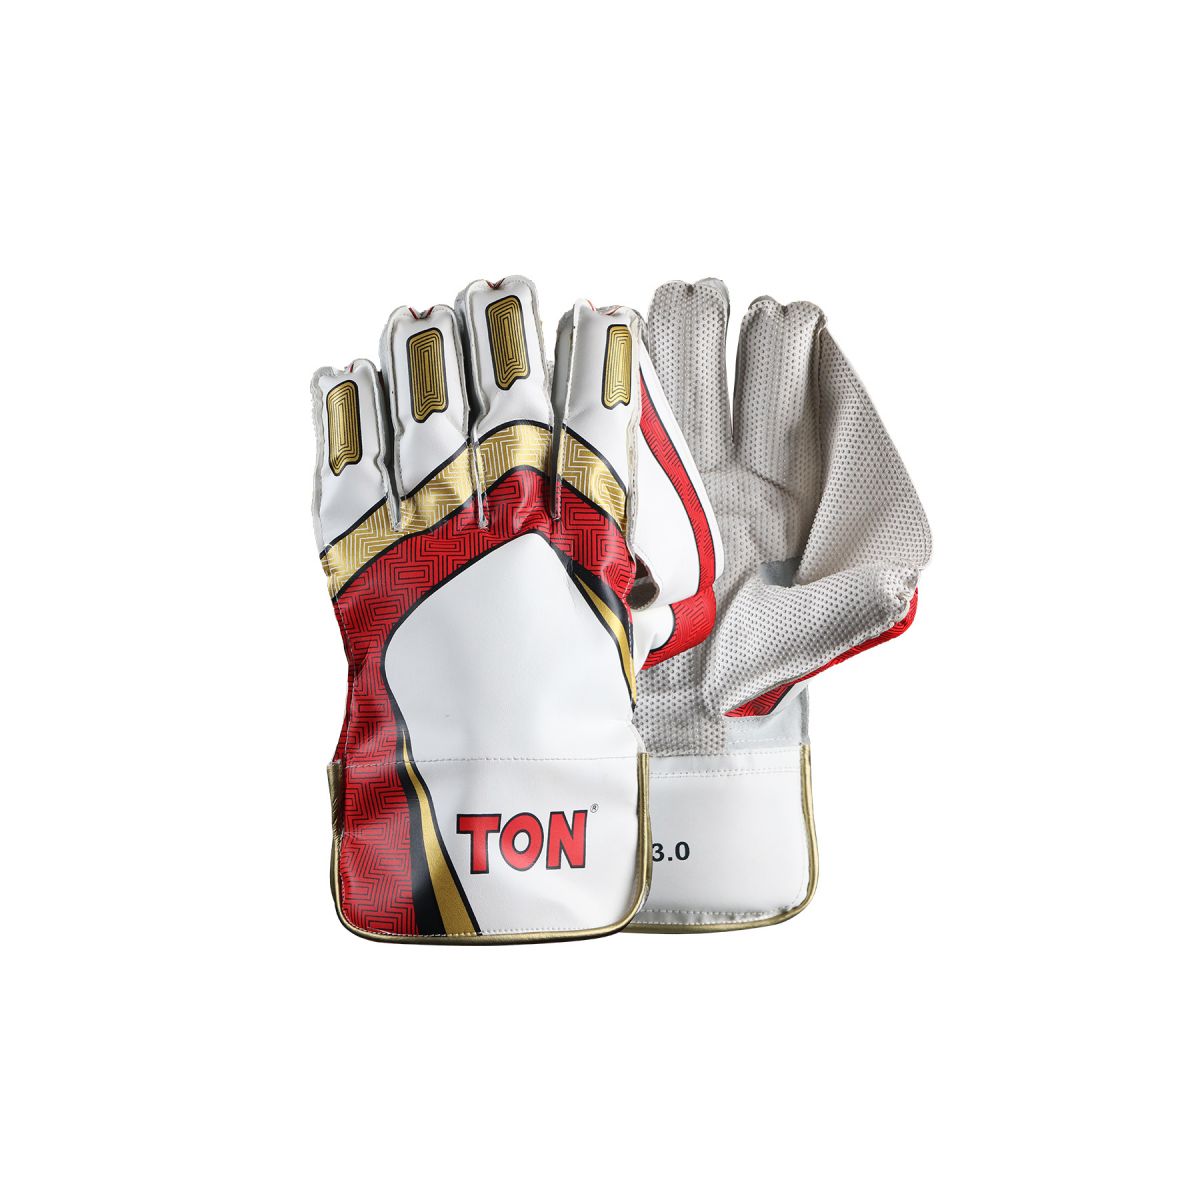 SS TON Pro Wicket Keeping Gloves